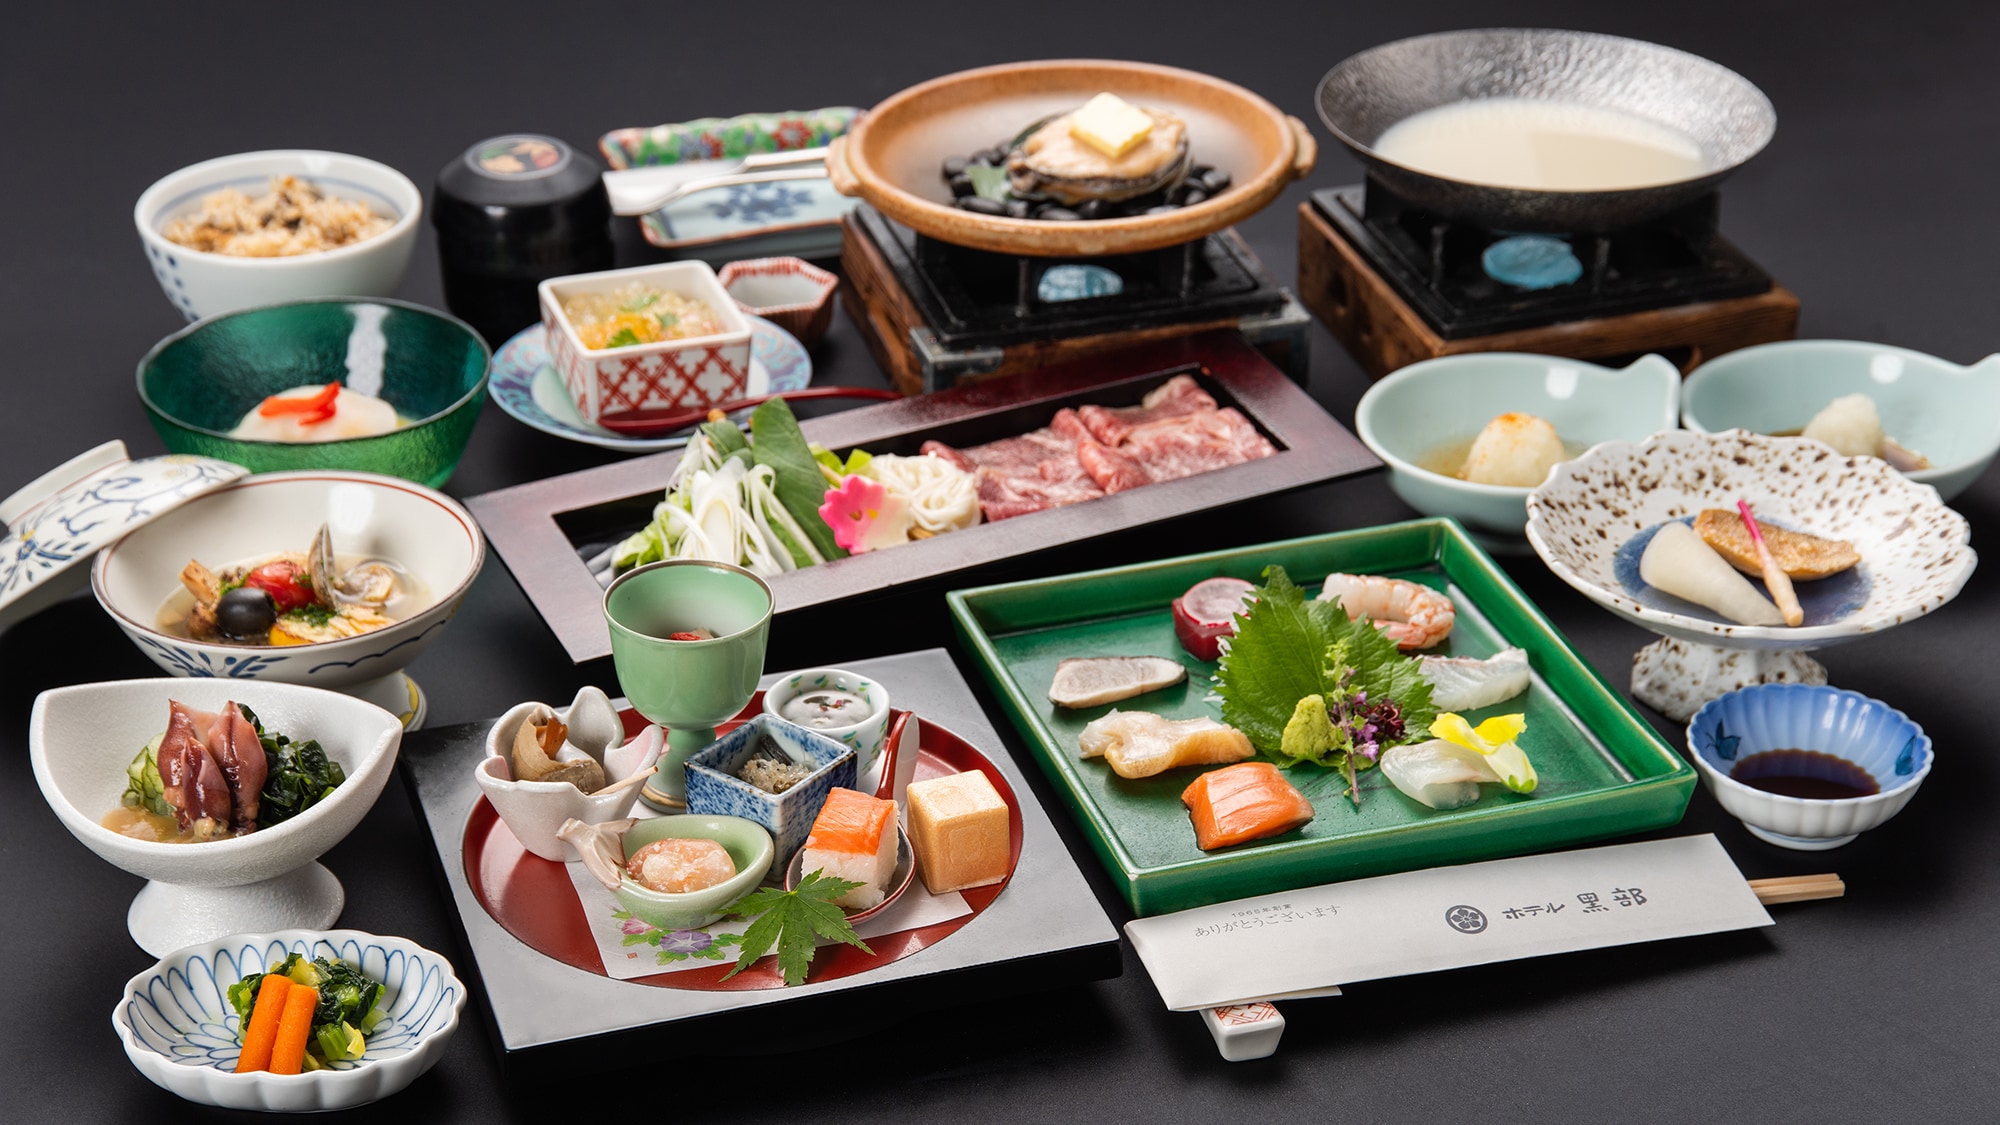 [An example of dinner] Matsu Kaiseki (The menu changes each time, so the contents may vary.)